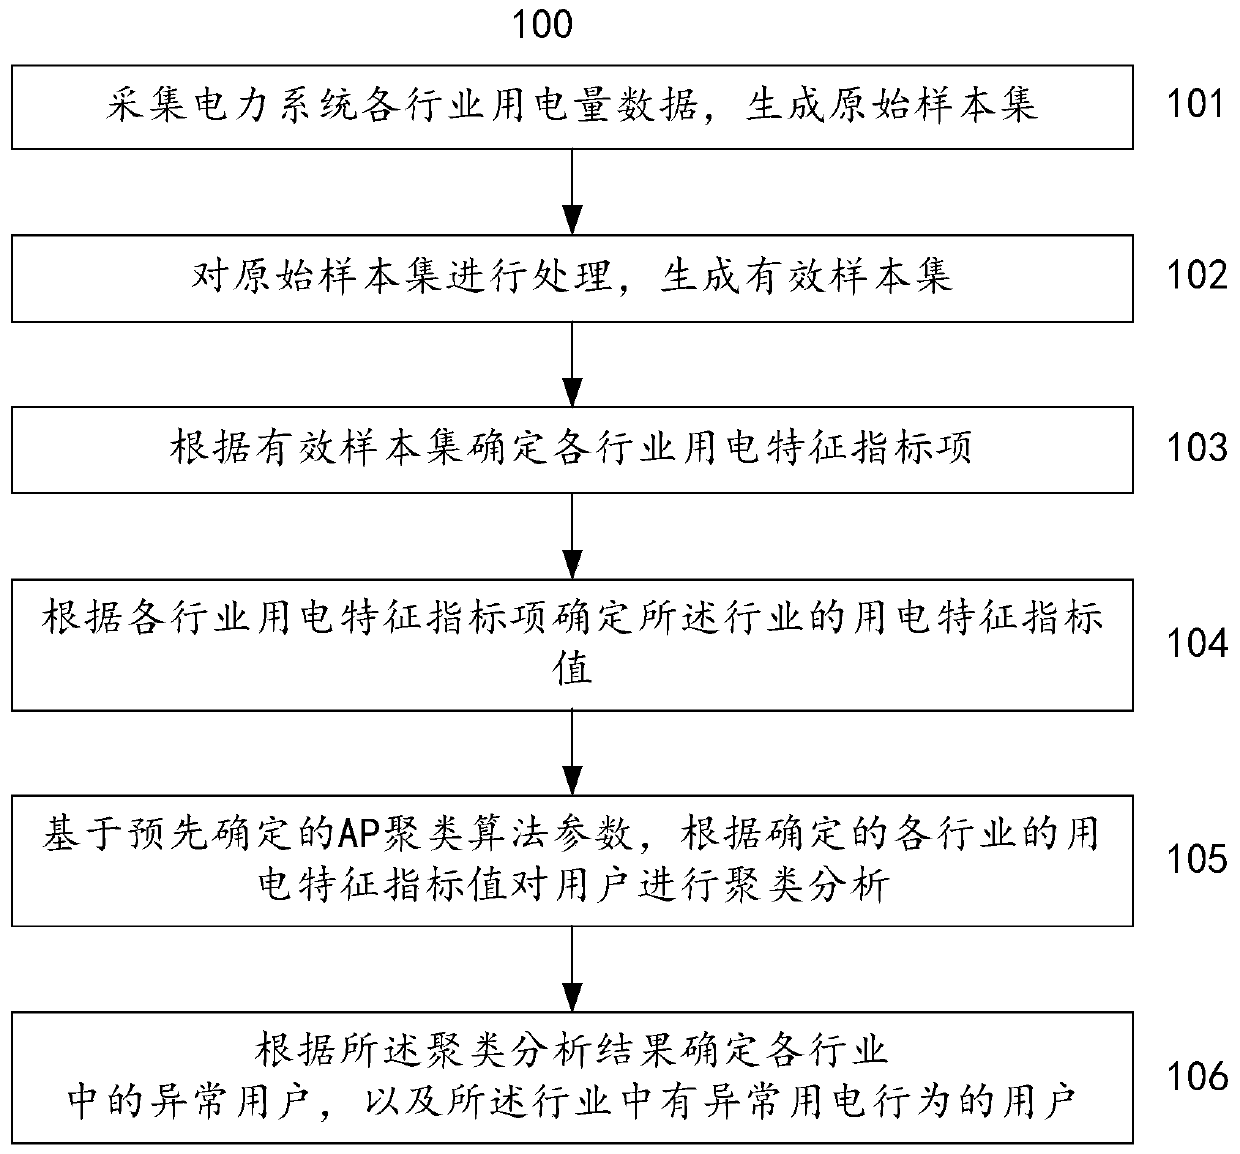 Method and system for identifying abnormal industry users and abnormal power utilization behaviors of power system